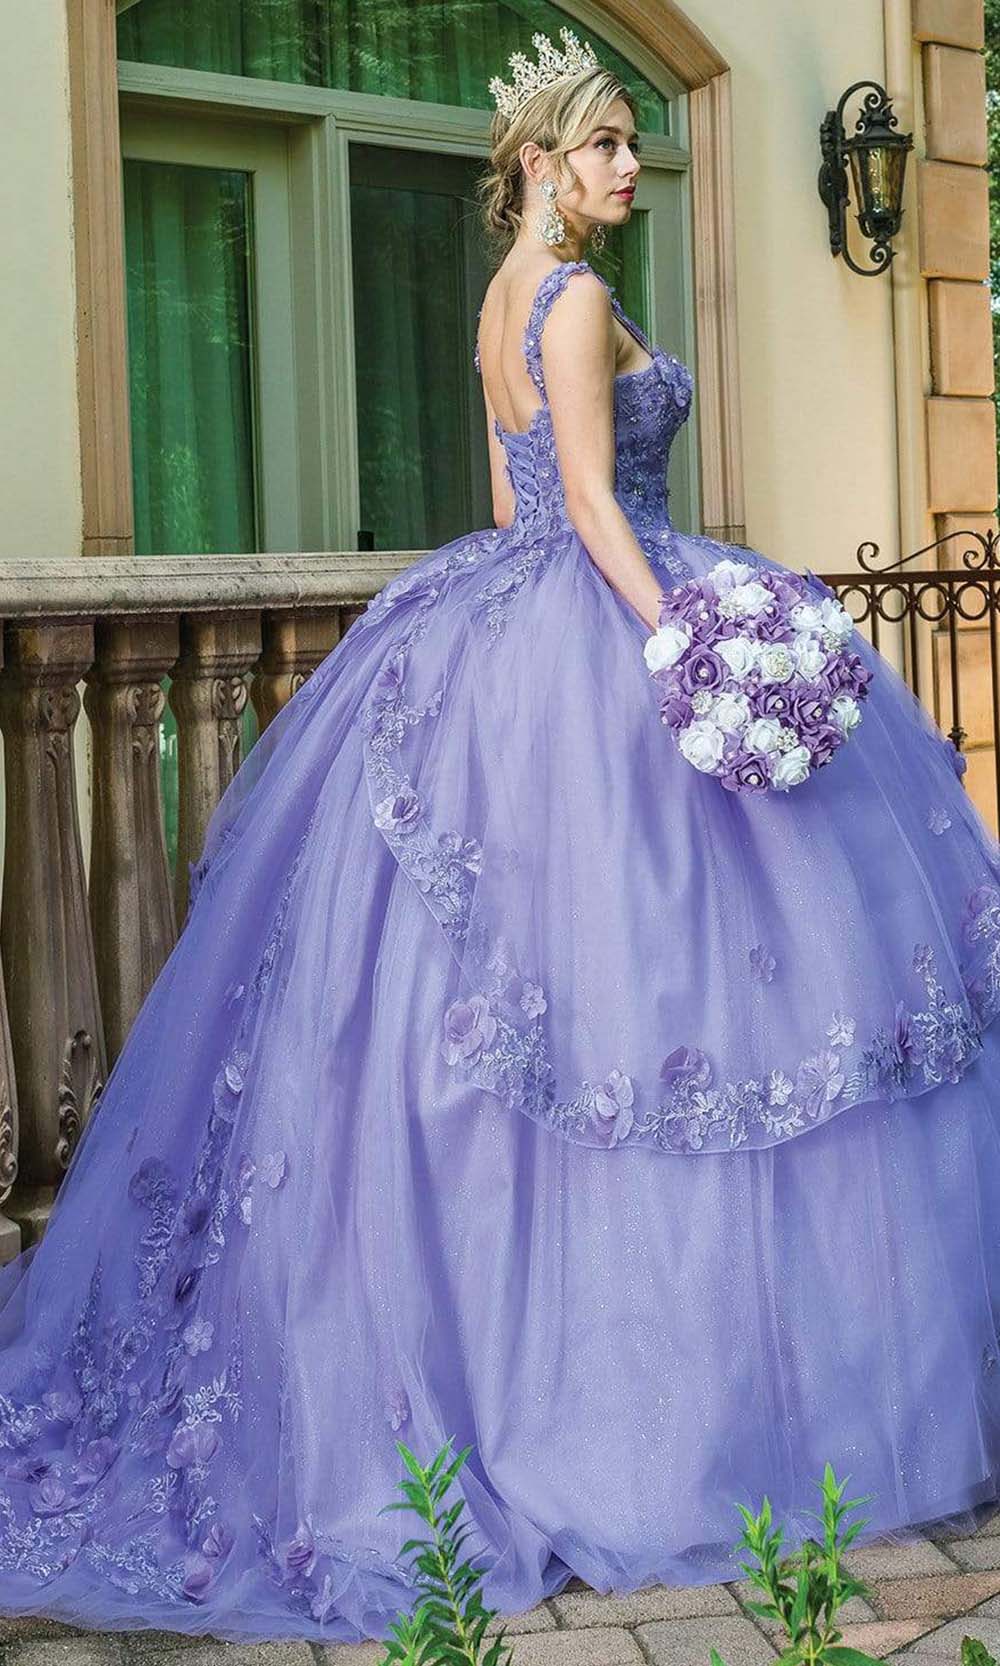 Dancing Queen - 1627 Sweetheart Fit and Flare Ballgown Quinceanera Dresses